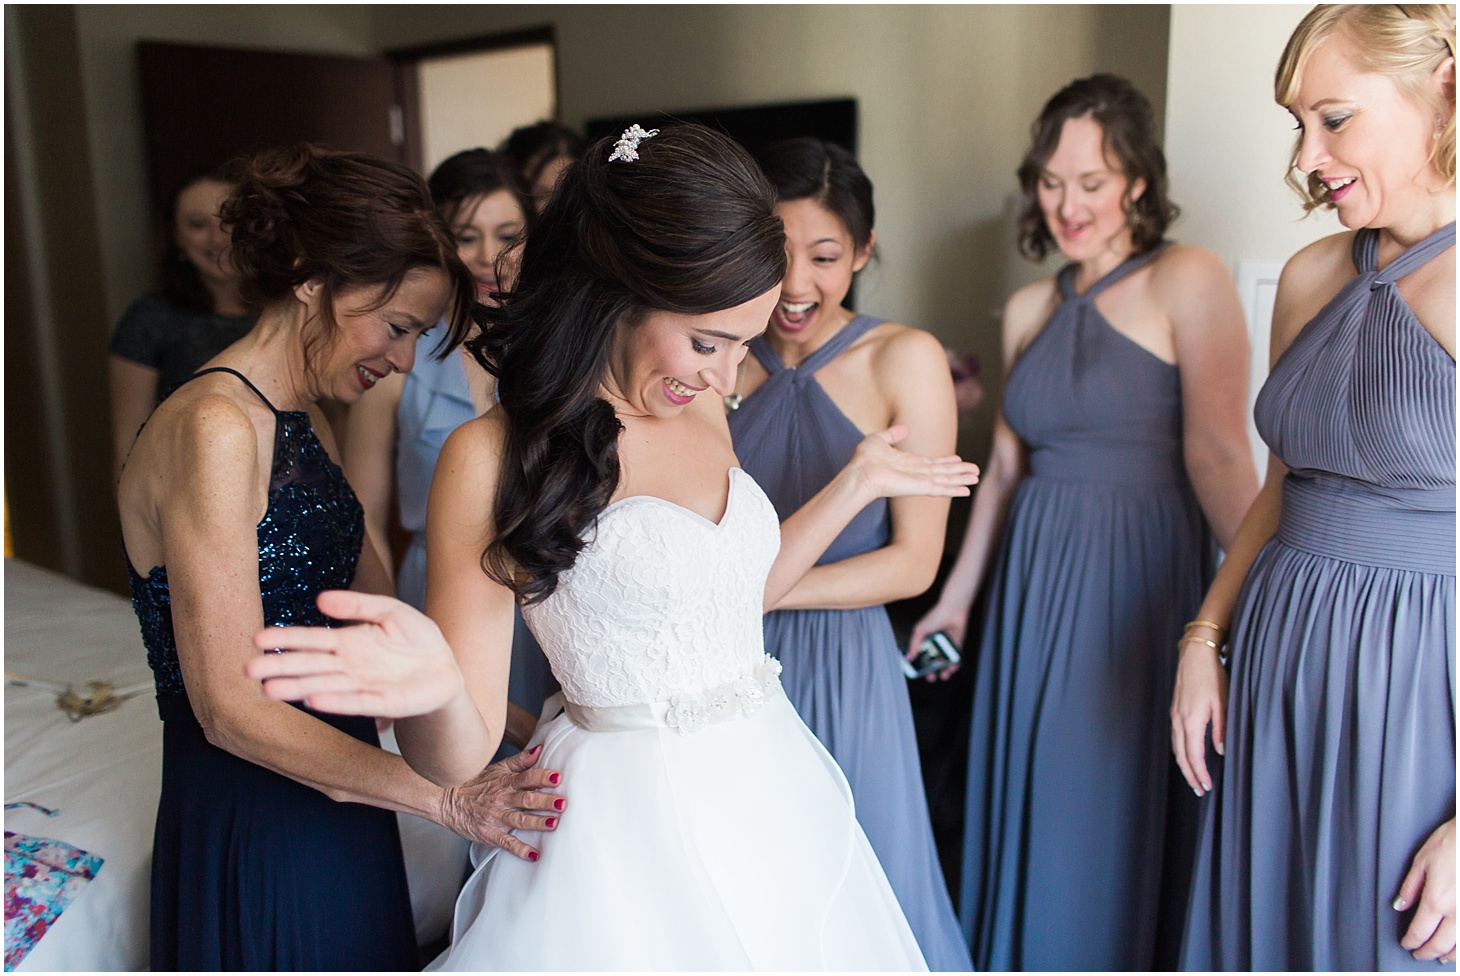 Bride Getting Ready at Grand Hyatt in Washington, DC, Museum-Inspired Spring Wedding at National Museum of Women in the Arts, Sarah Bradshaw Photography, DC Wedding Photographer